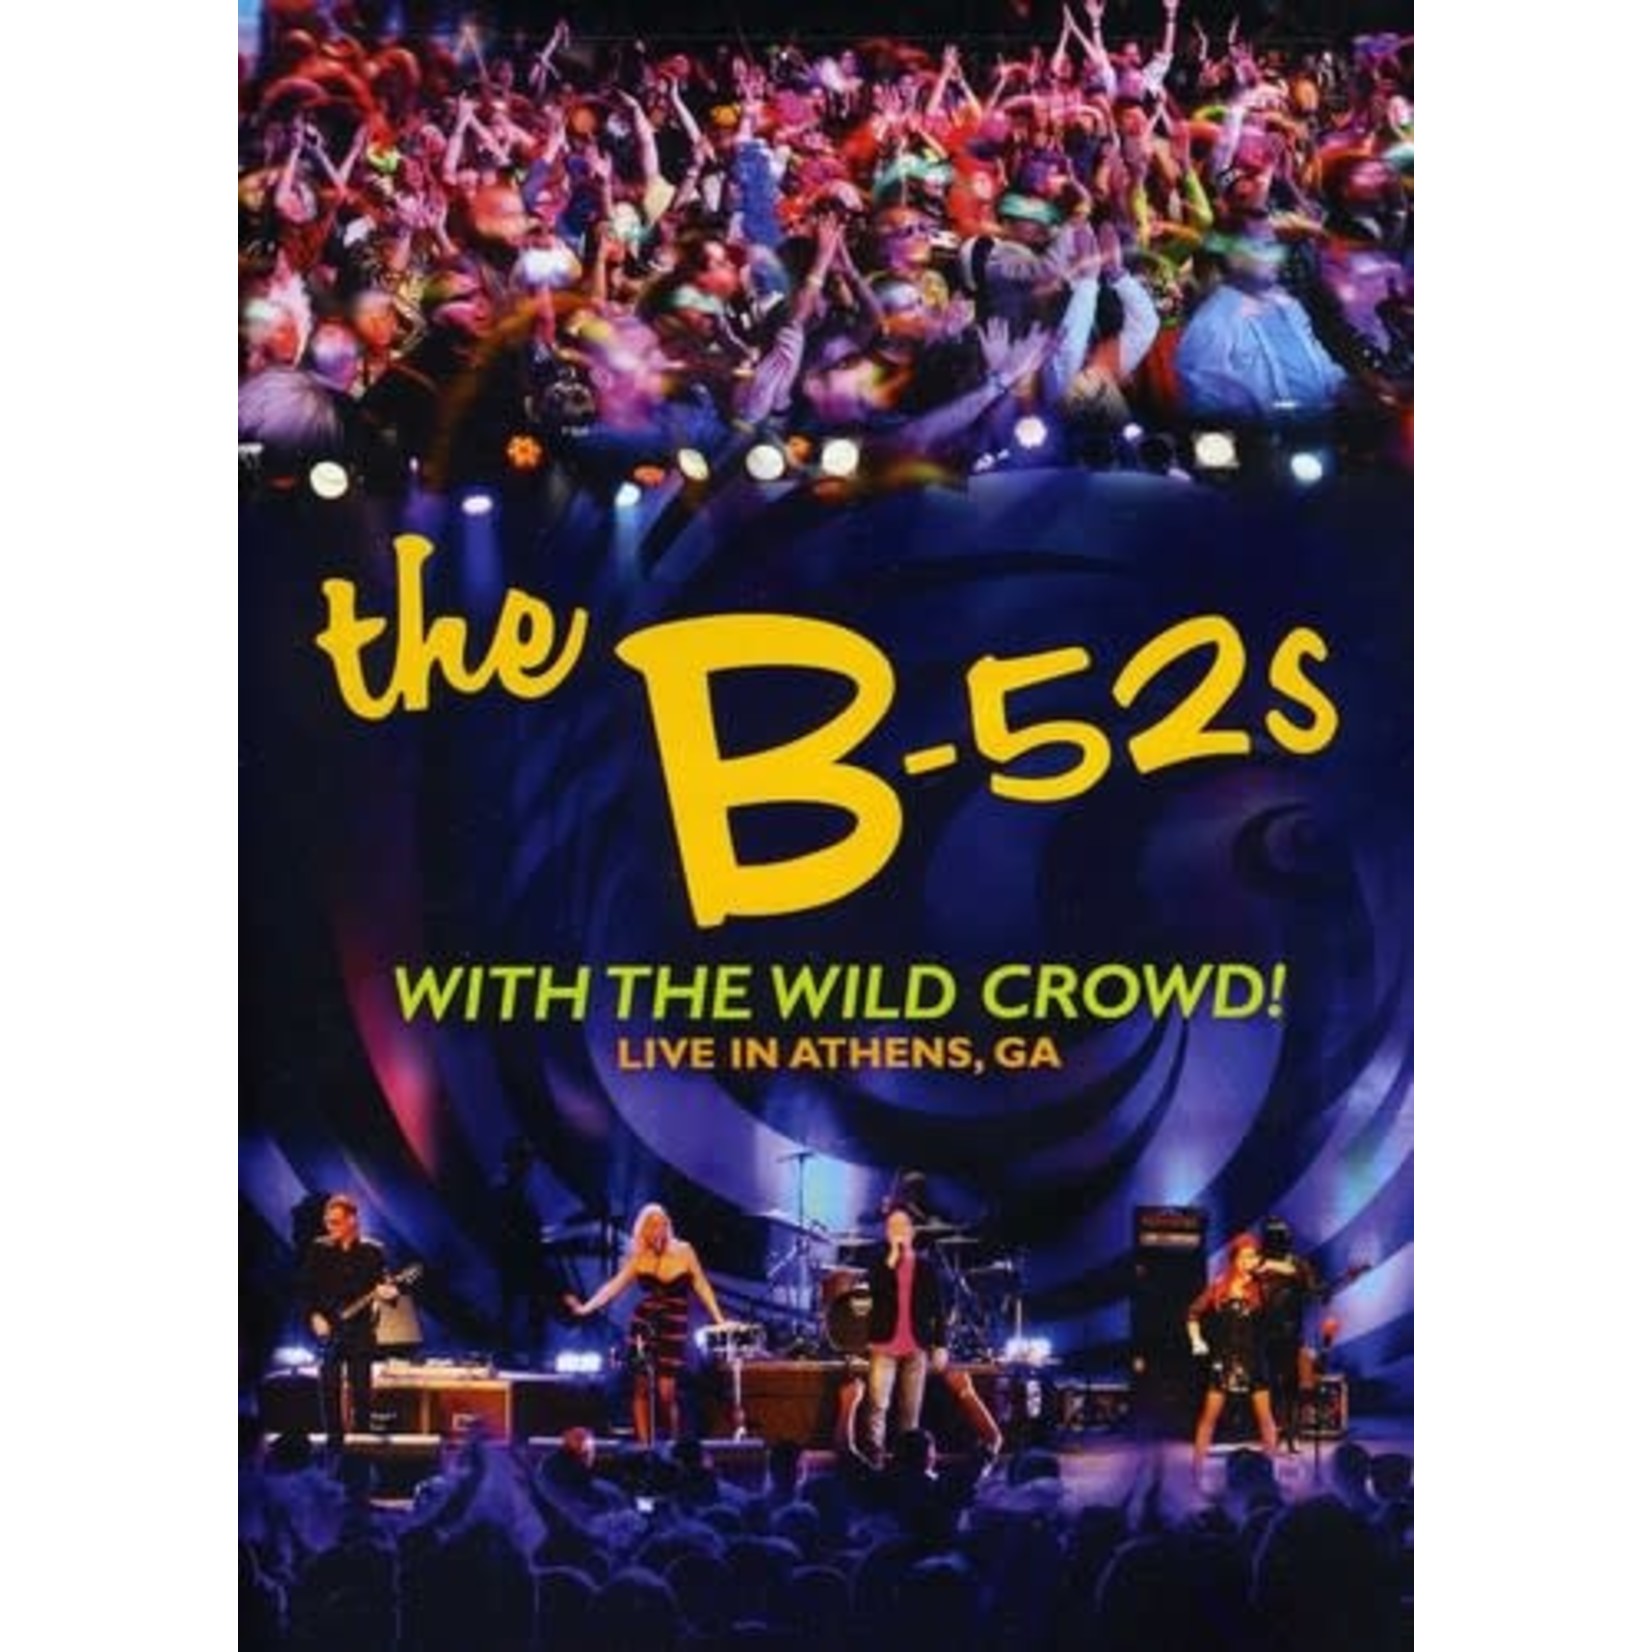 B-52's - With The Wild Crowd!: Live In Athens, GA[DVD]